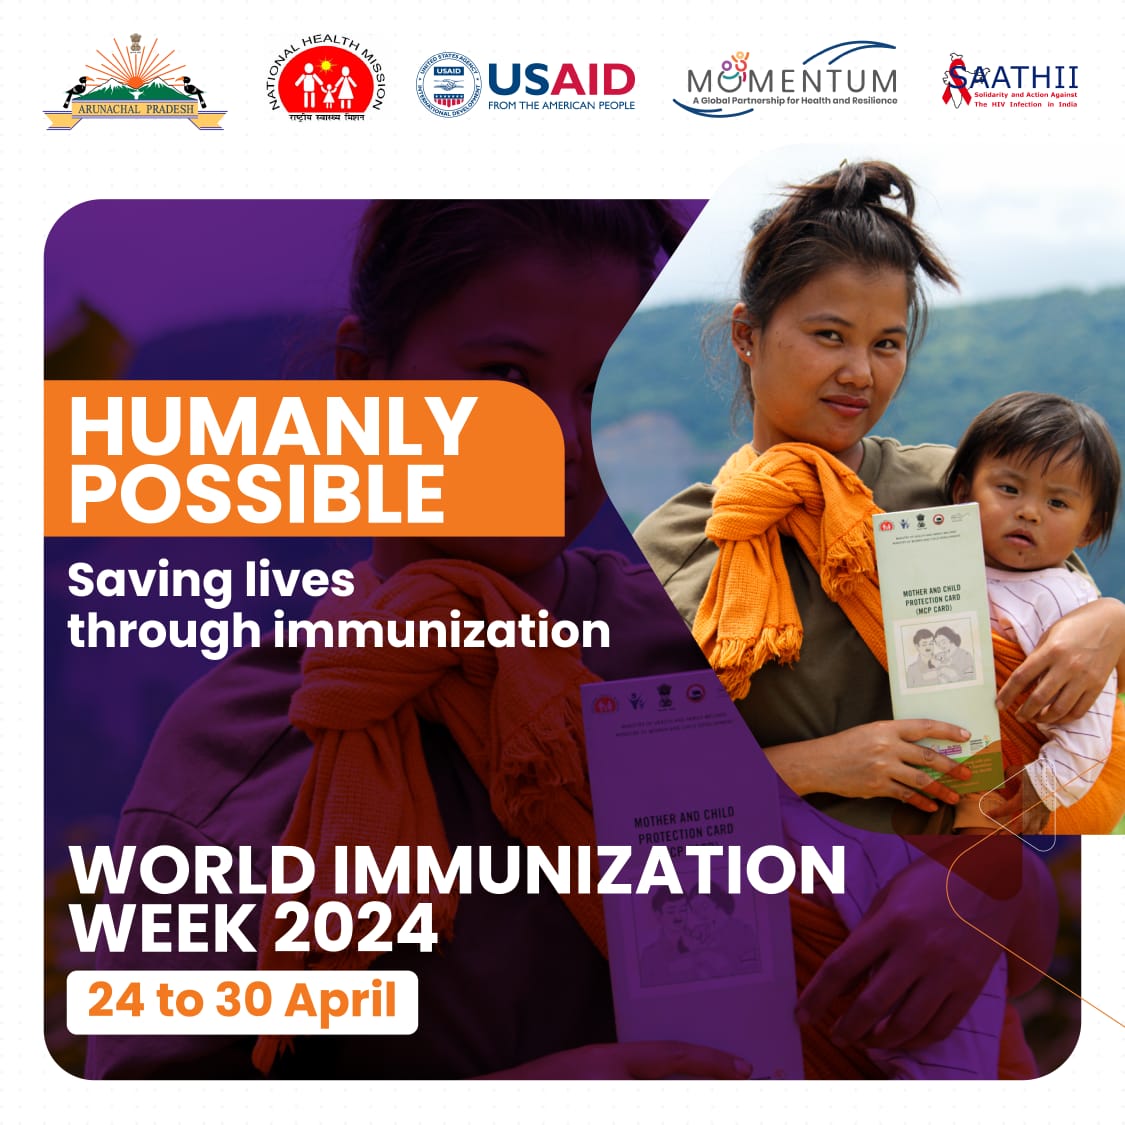 This World Immunization Week, let's celebrate the power of vaccines in protecting lives and ensure that no child should be left behind when it comes to immunization. #WorldImmunizationWeek #HumanlyPossible #VaccineSaveLives